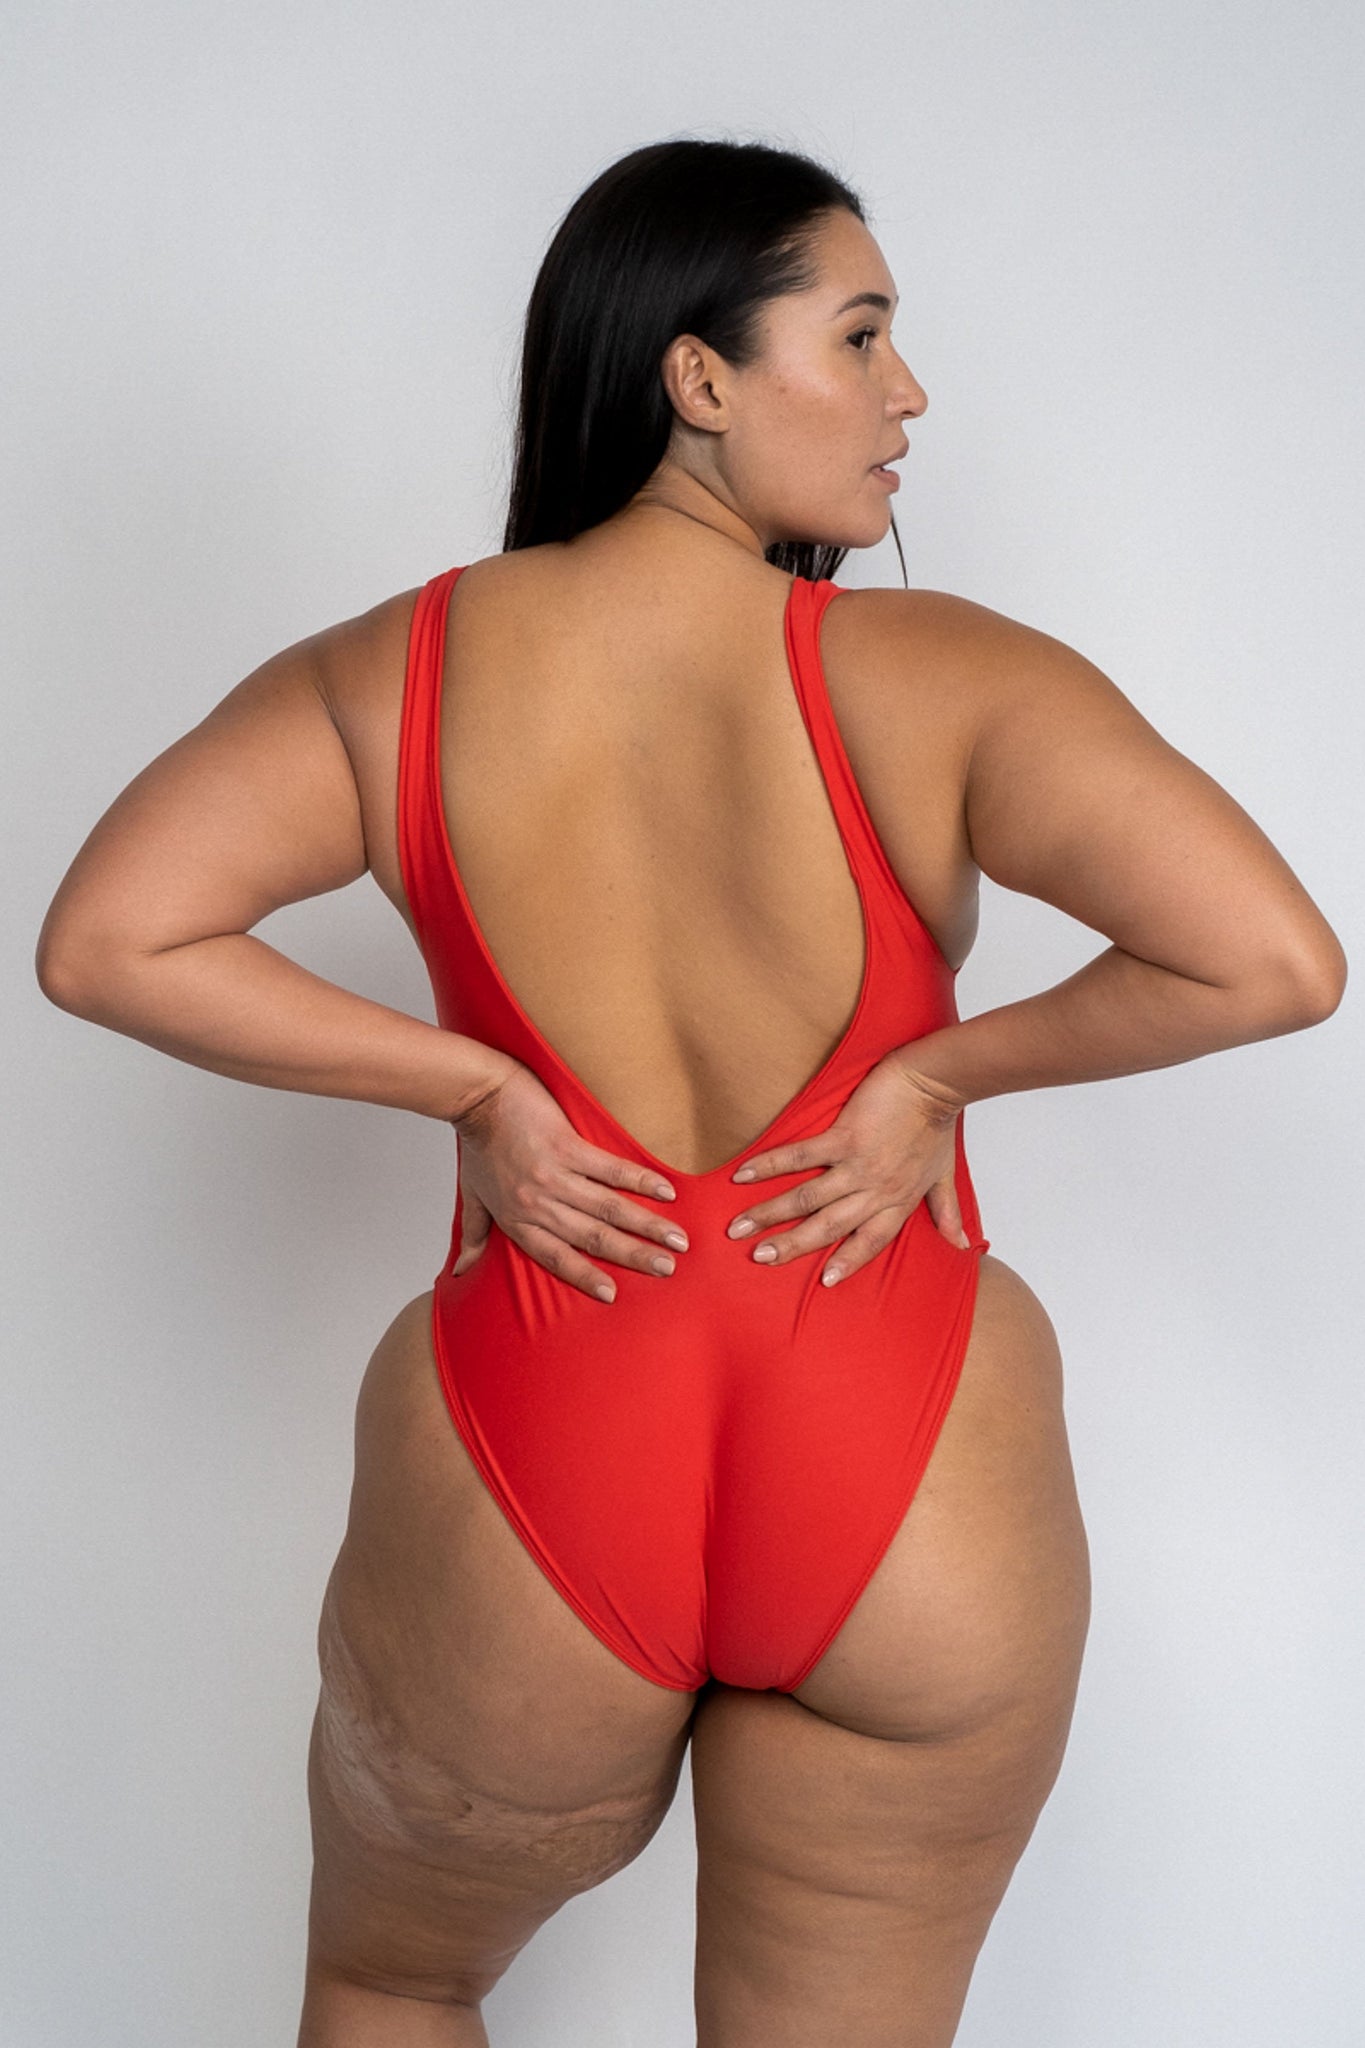 The back of a woman standing with her hands on her hips looking to the side wearing a bright red one piece swimsuit with a low back and minimal coverage.